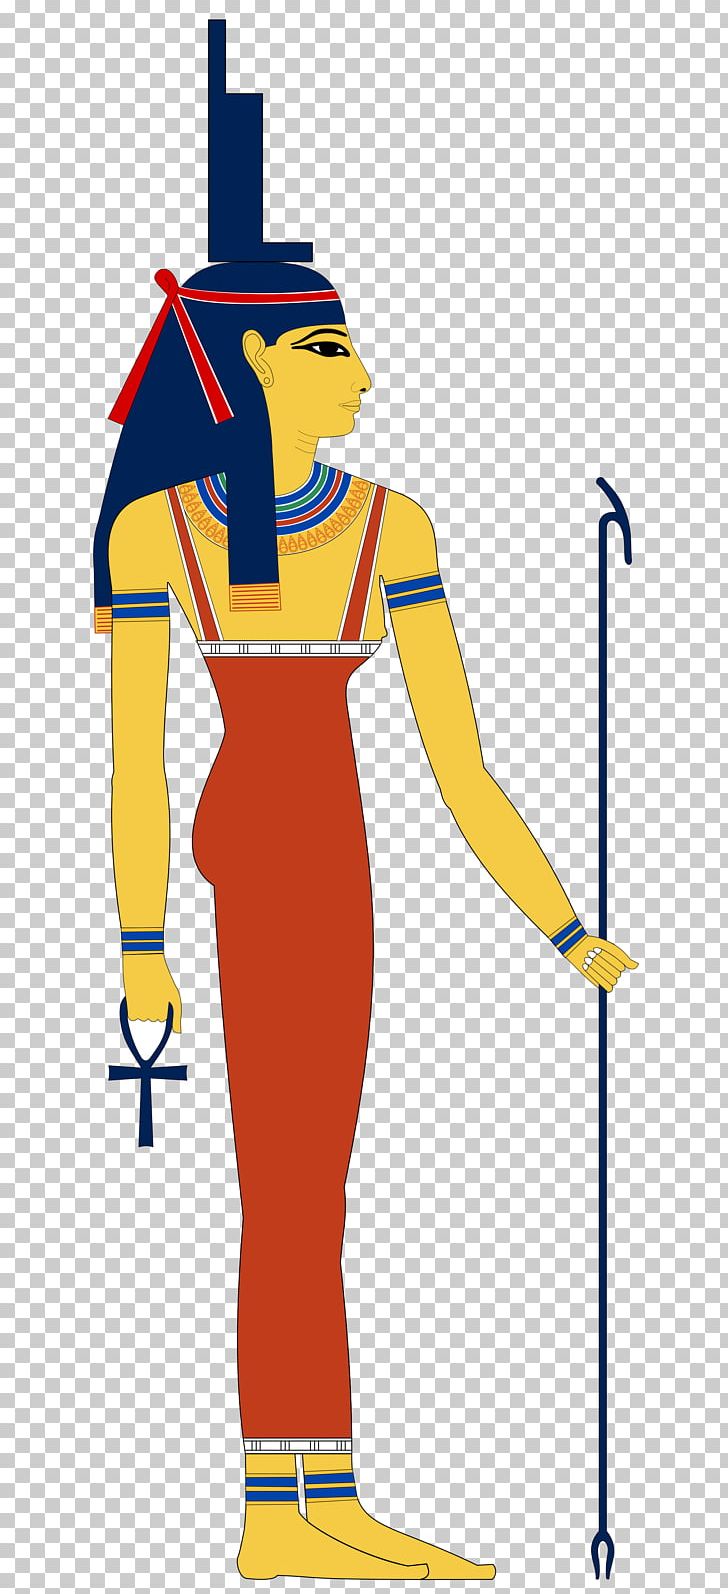 egypt clipart isis